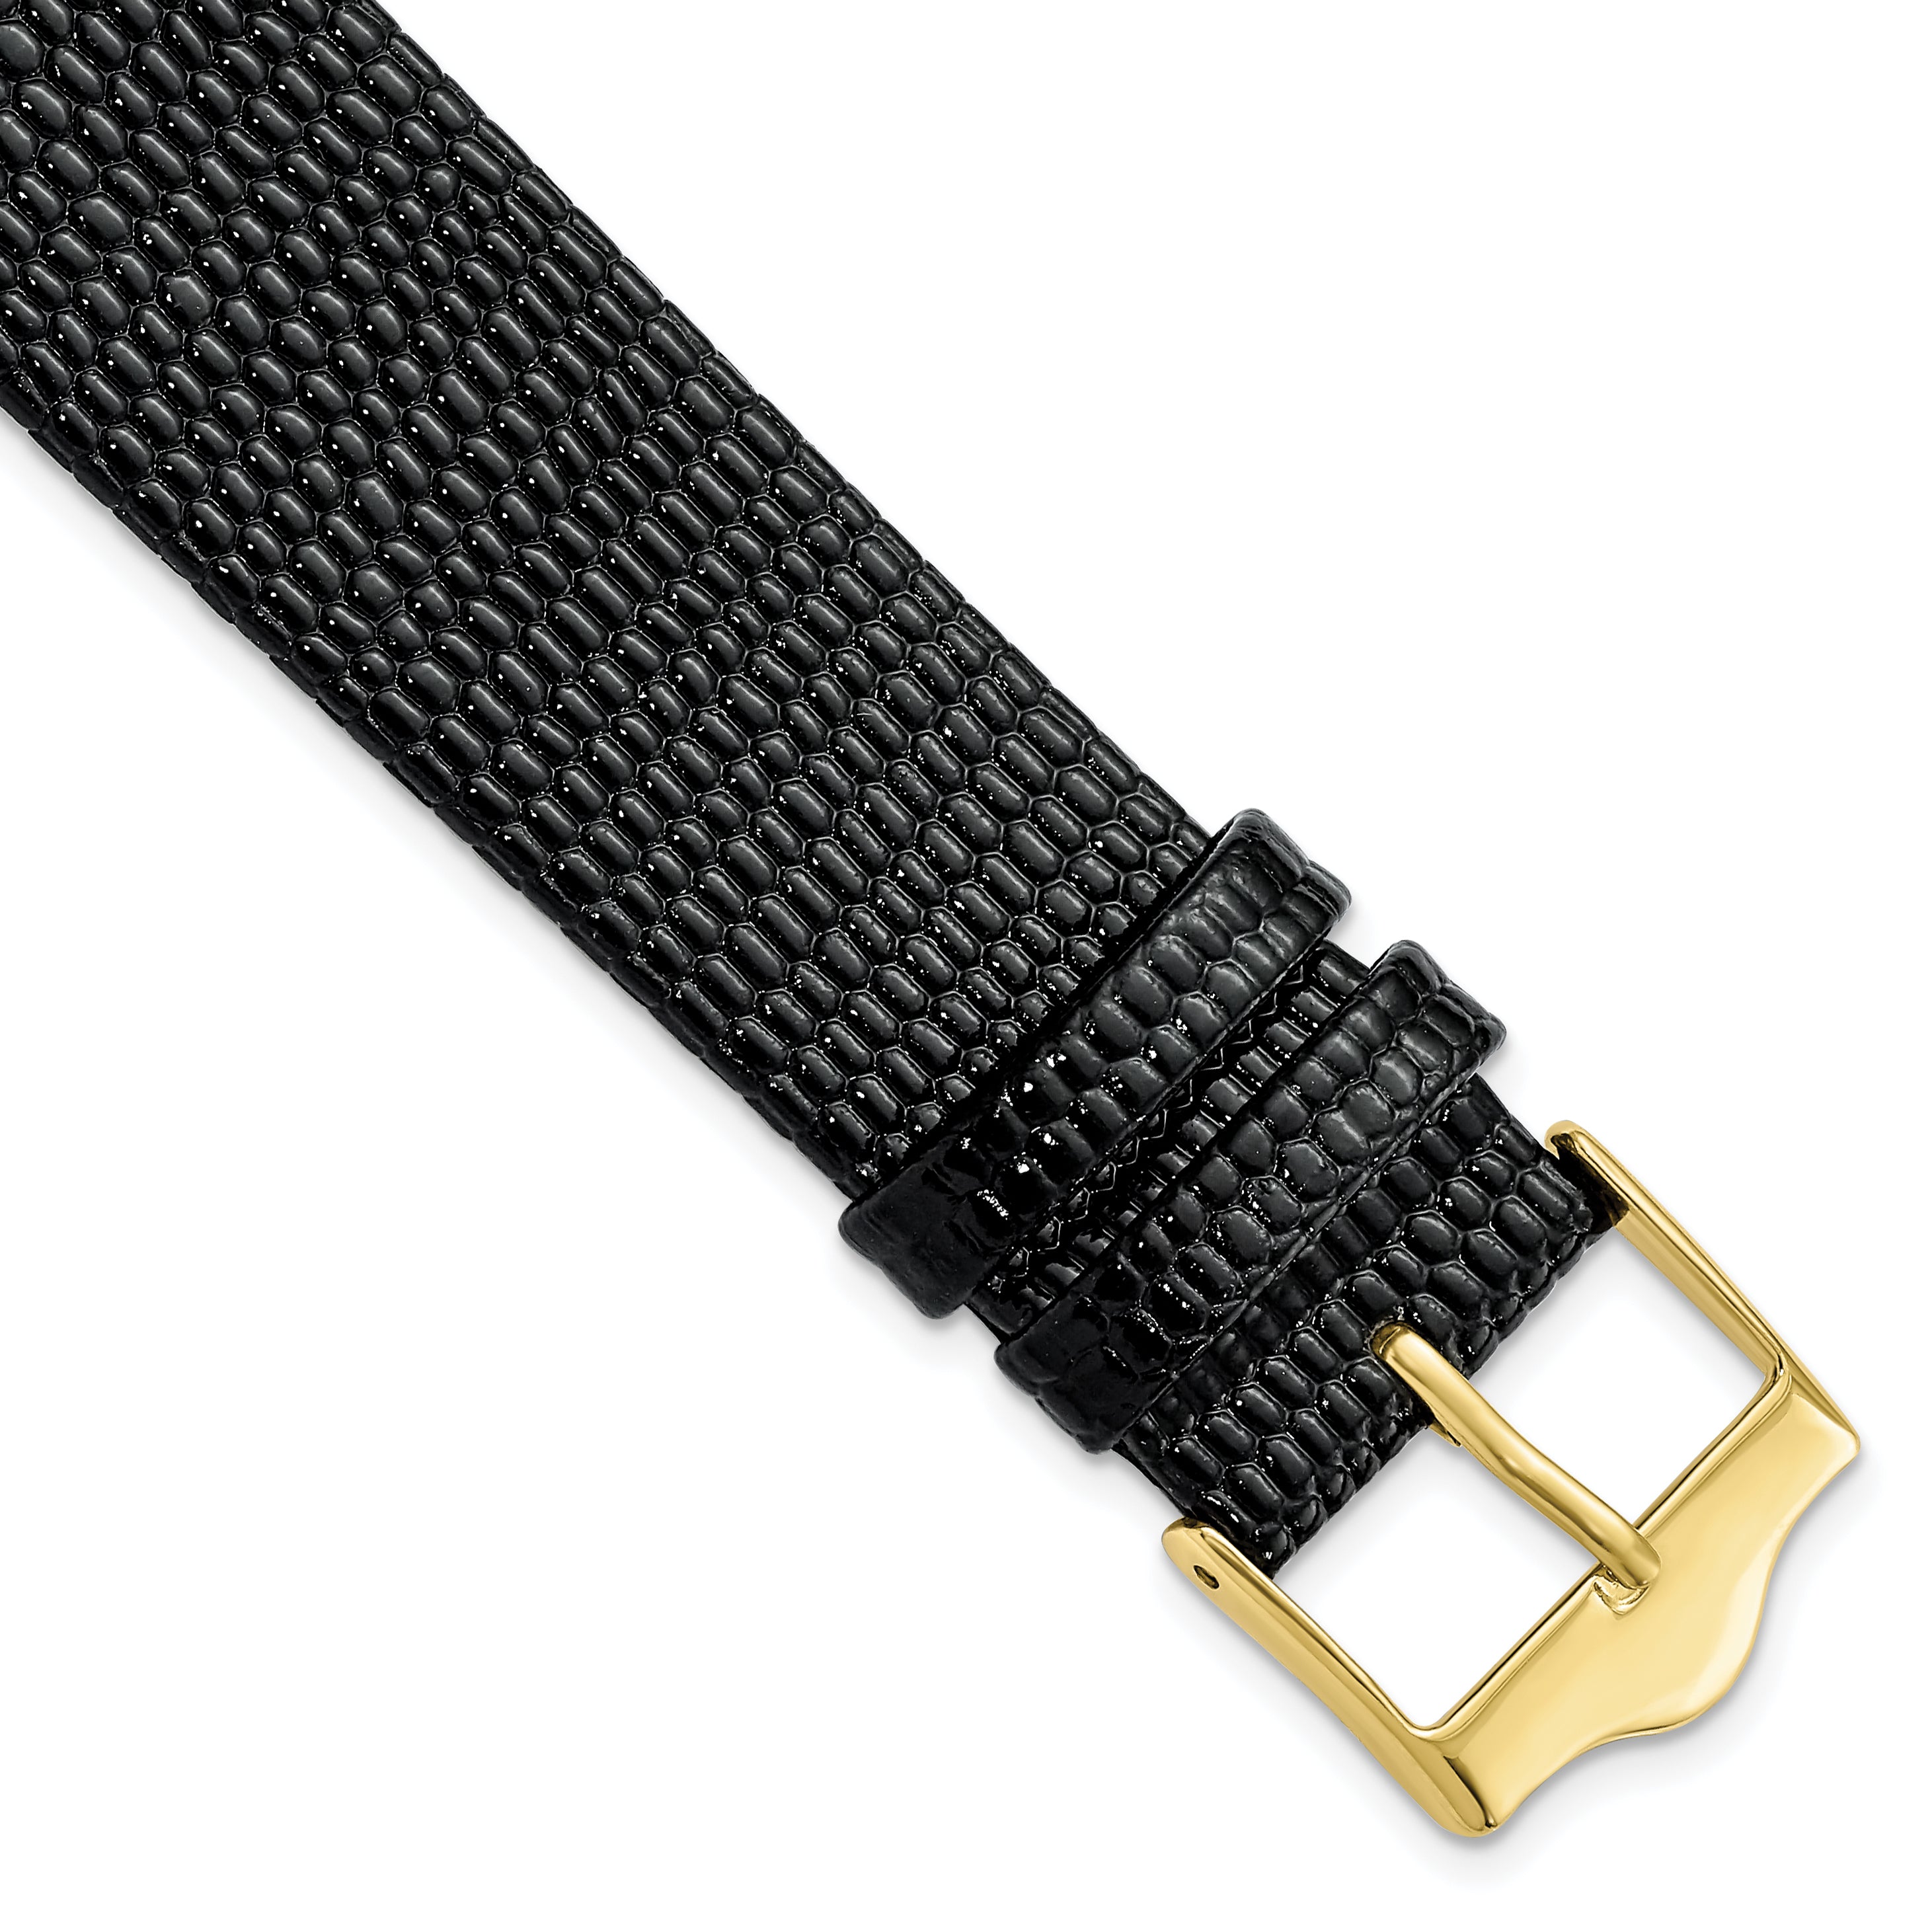 DeBeer 20mm Flat Black Lizard Grain Leather with Gold-tone Buckle 7.5 inch Watch Band